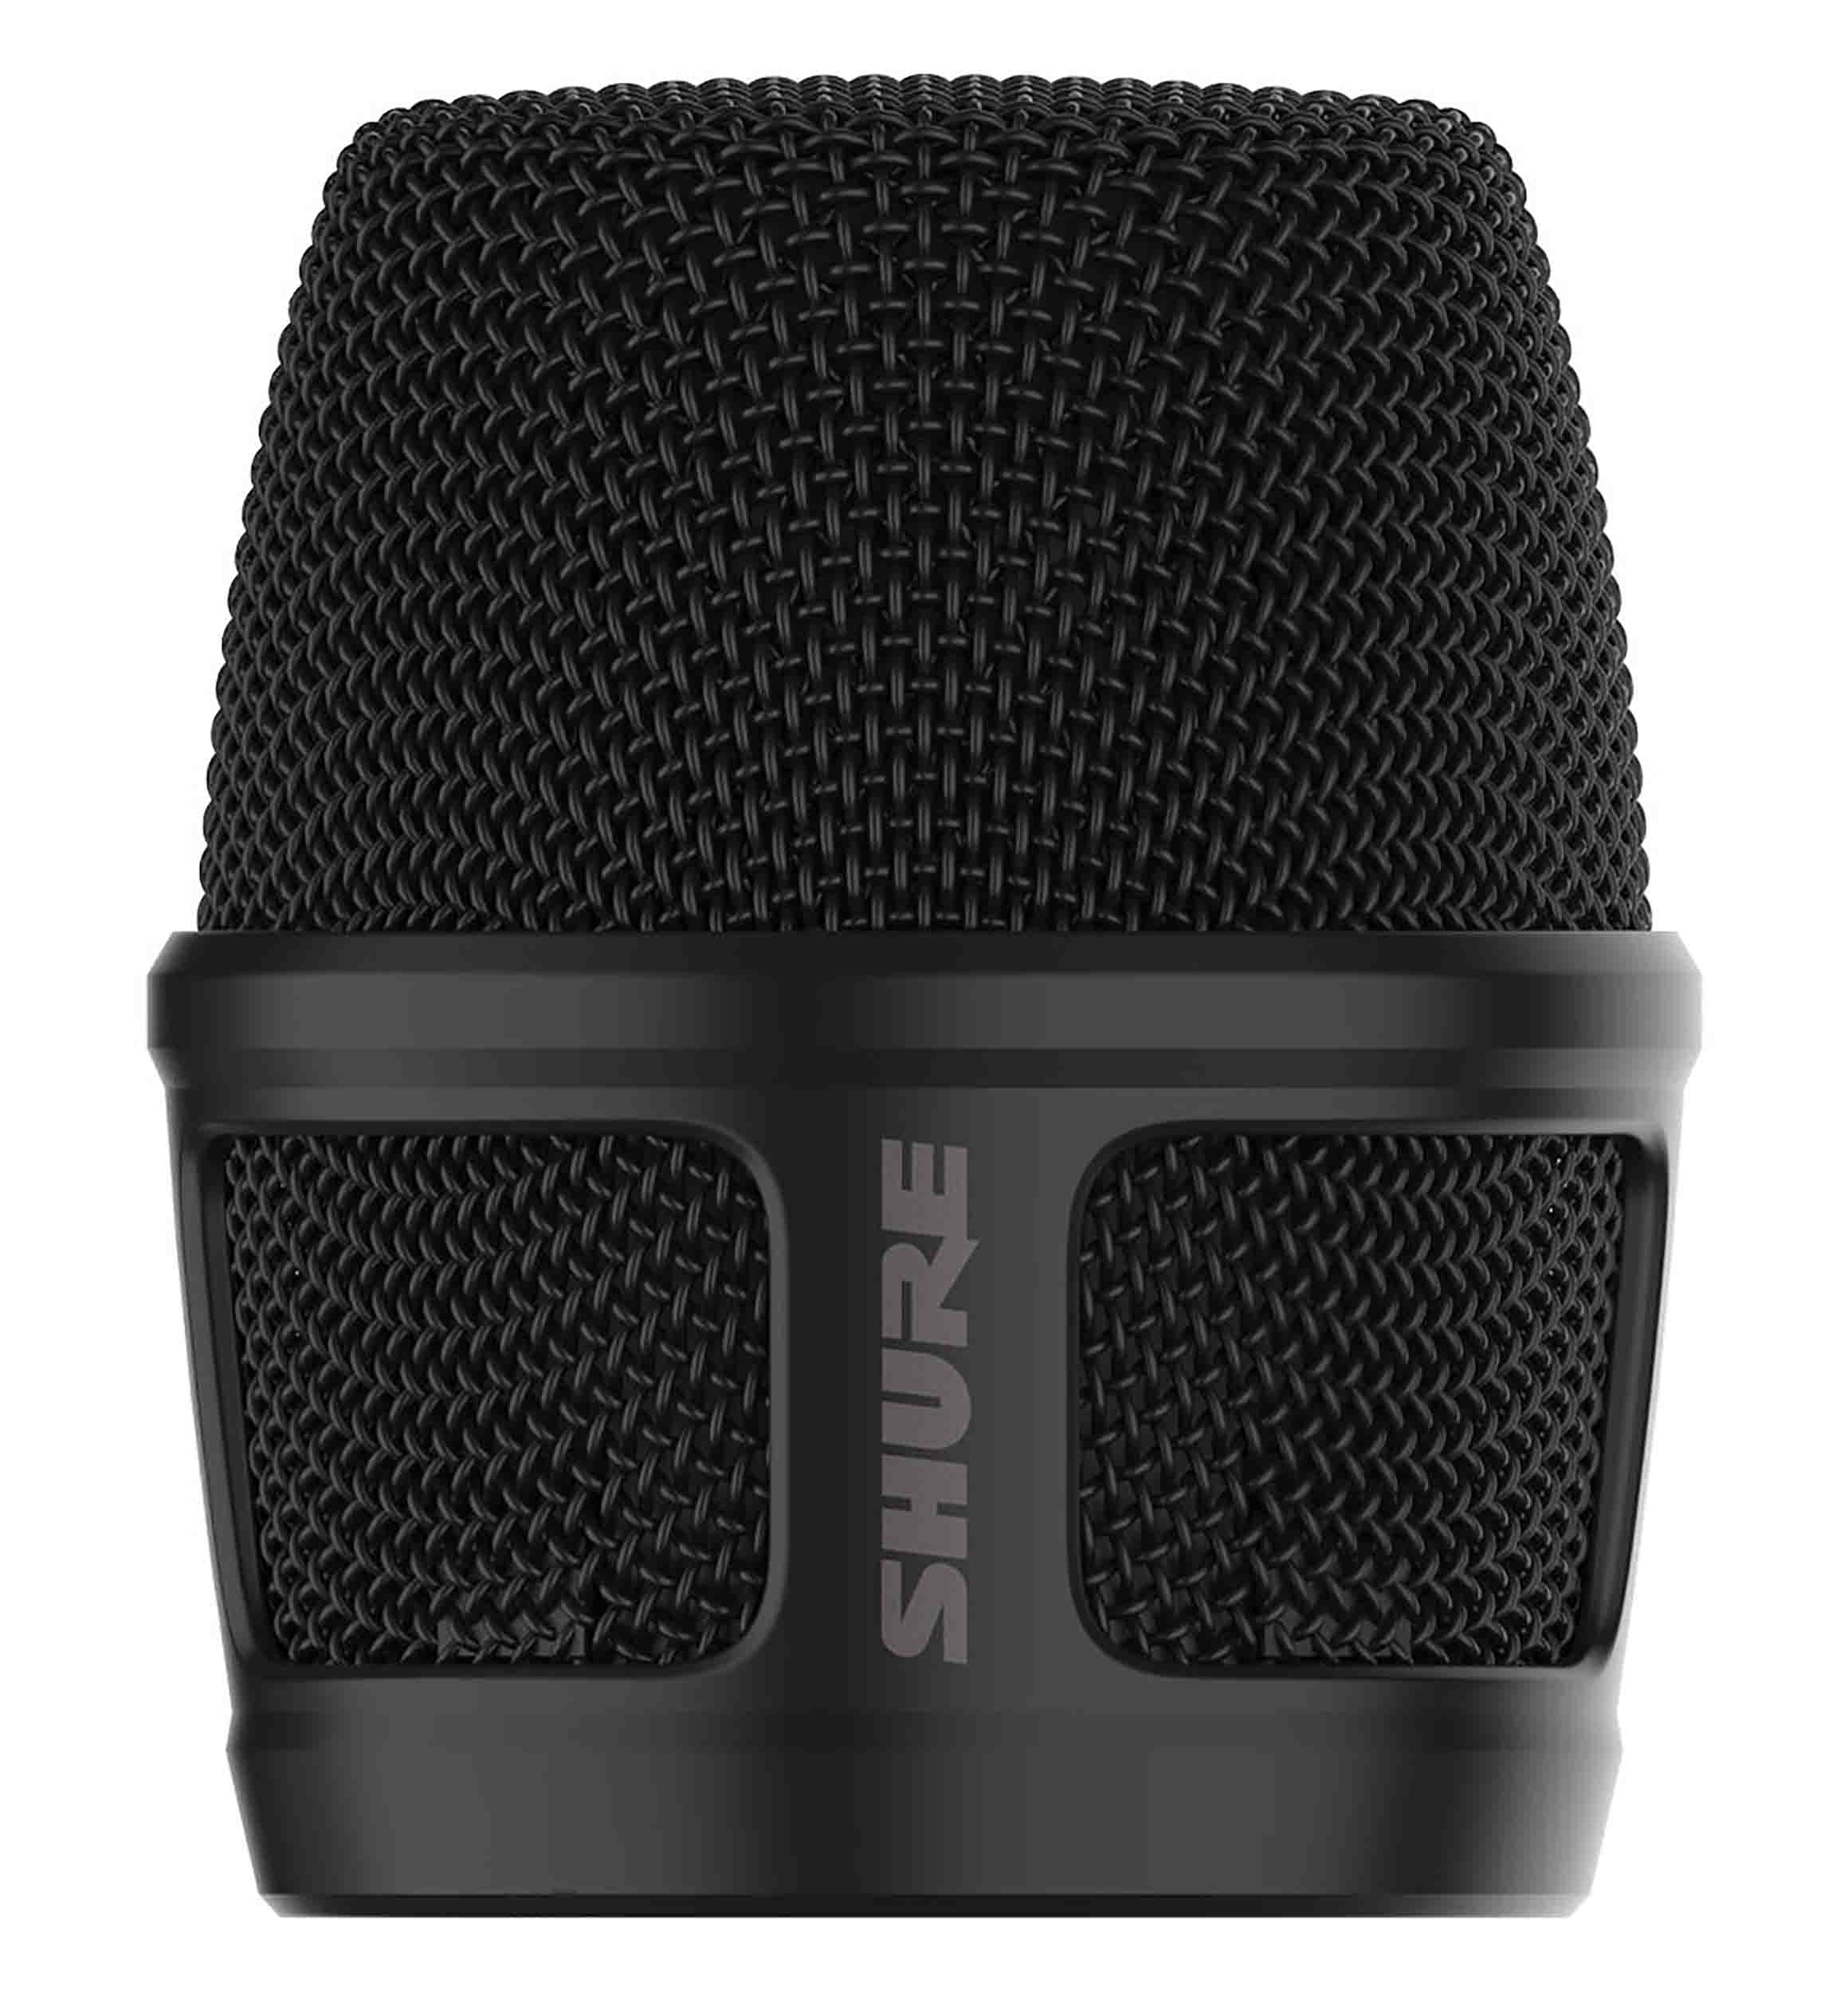 Shure RPM28 Grille for Nexadyne 8/S Supercardioid Microphone by Shure